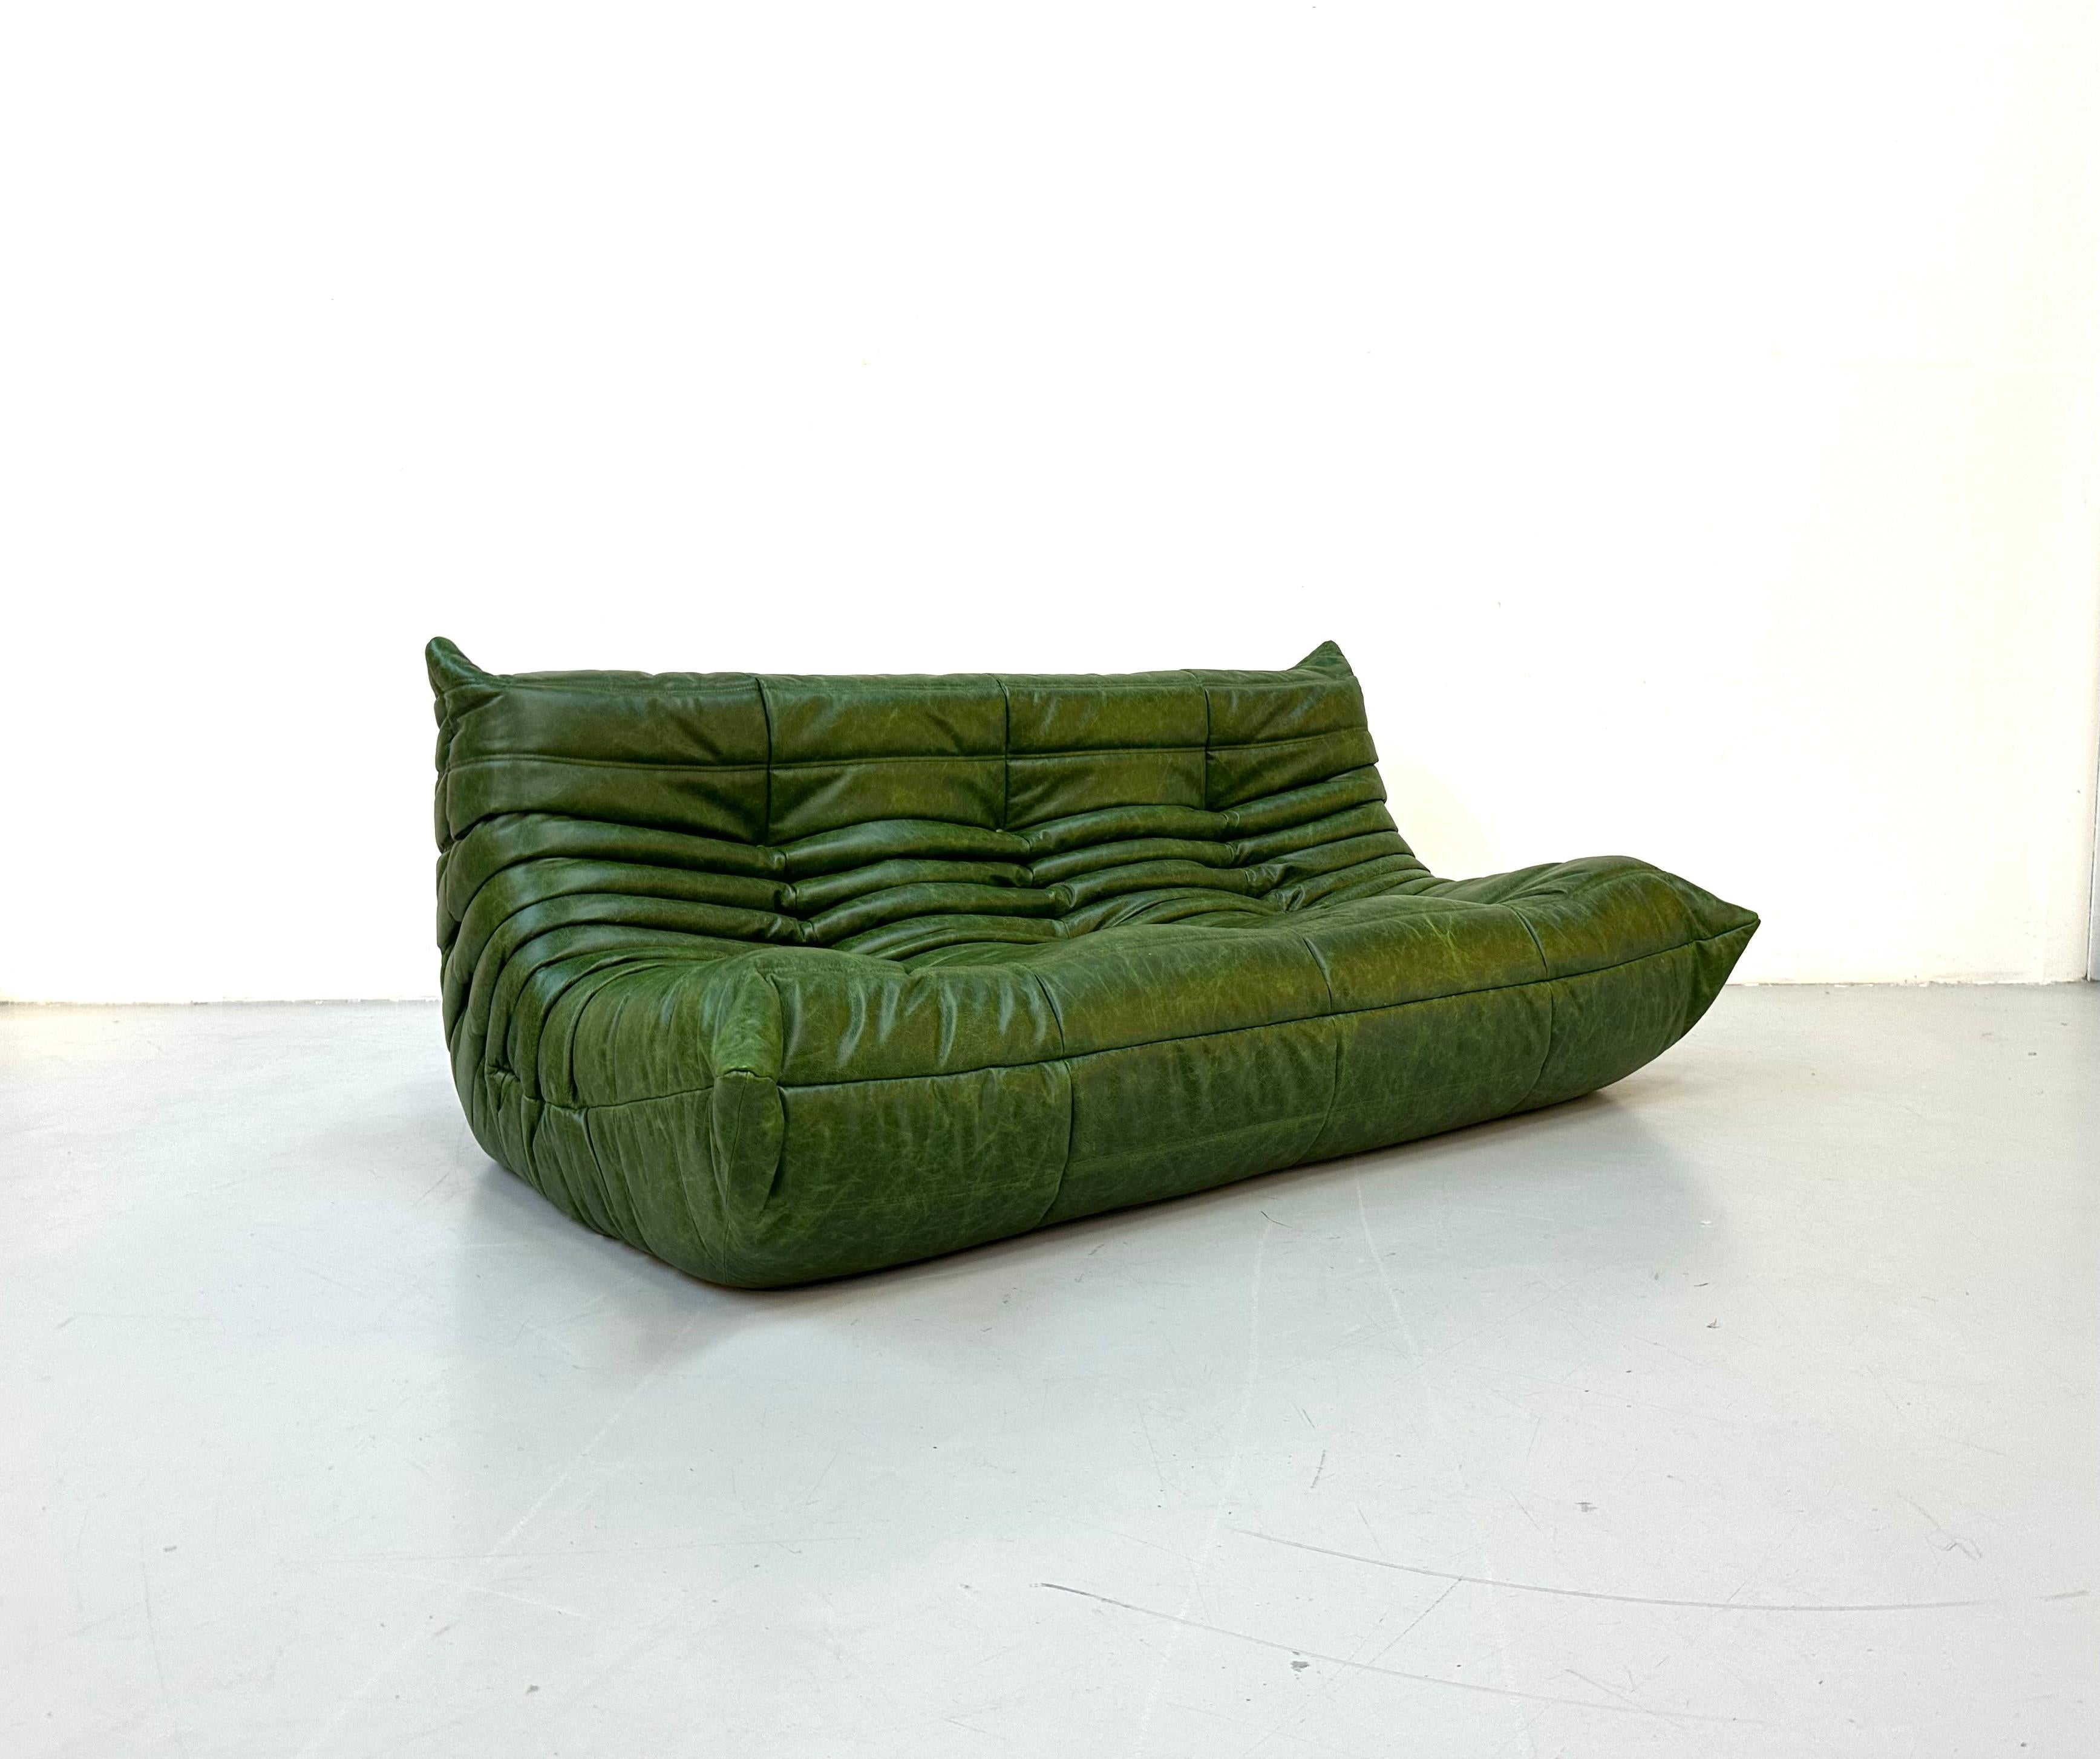 French Vintage Togo Sofa in Green  Leather by Michel Ducaroy for Ligne Roset. 1